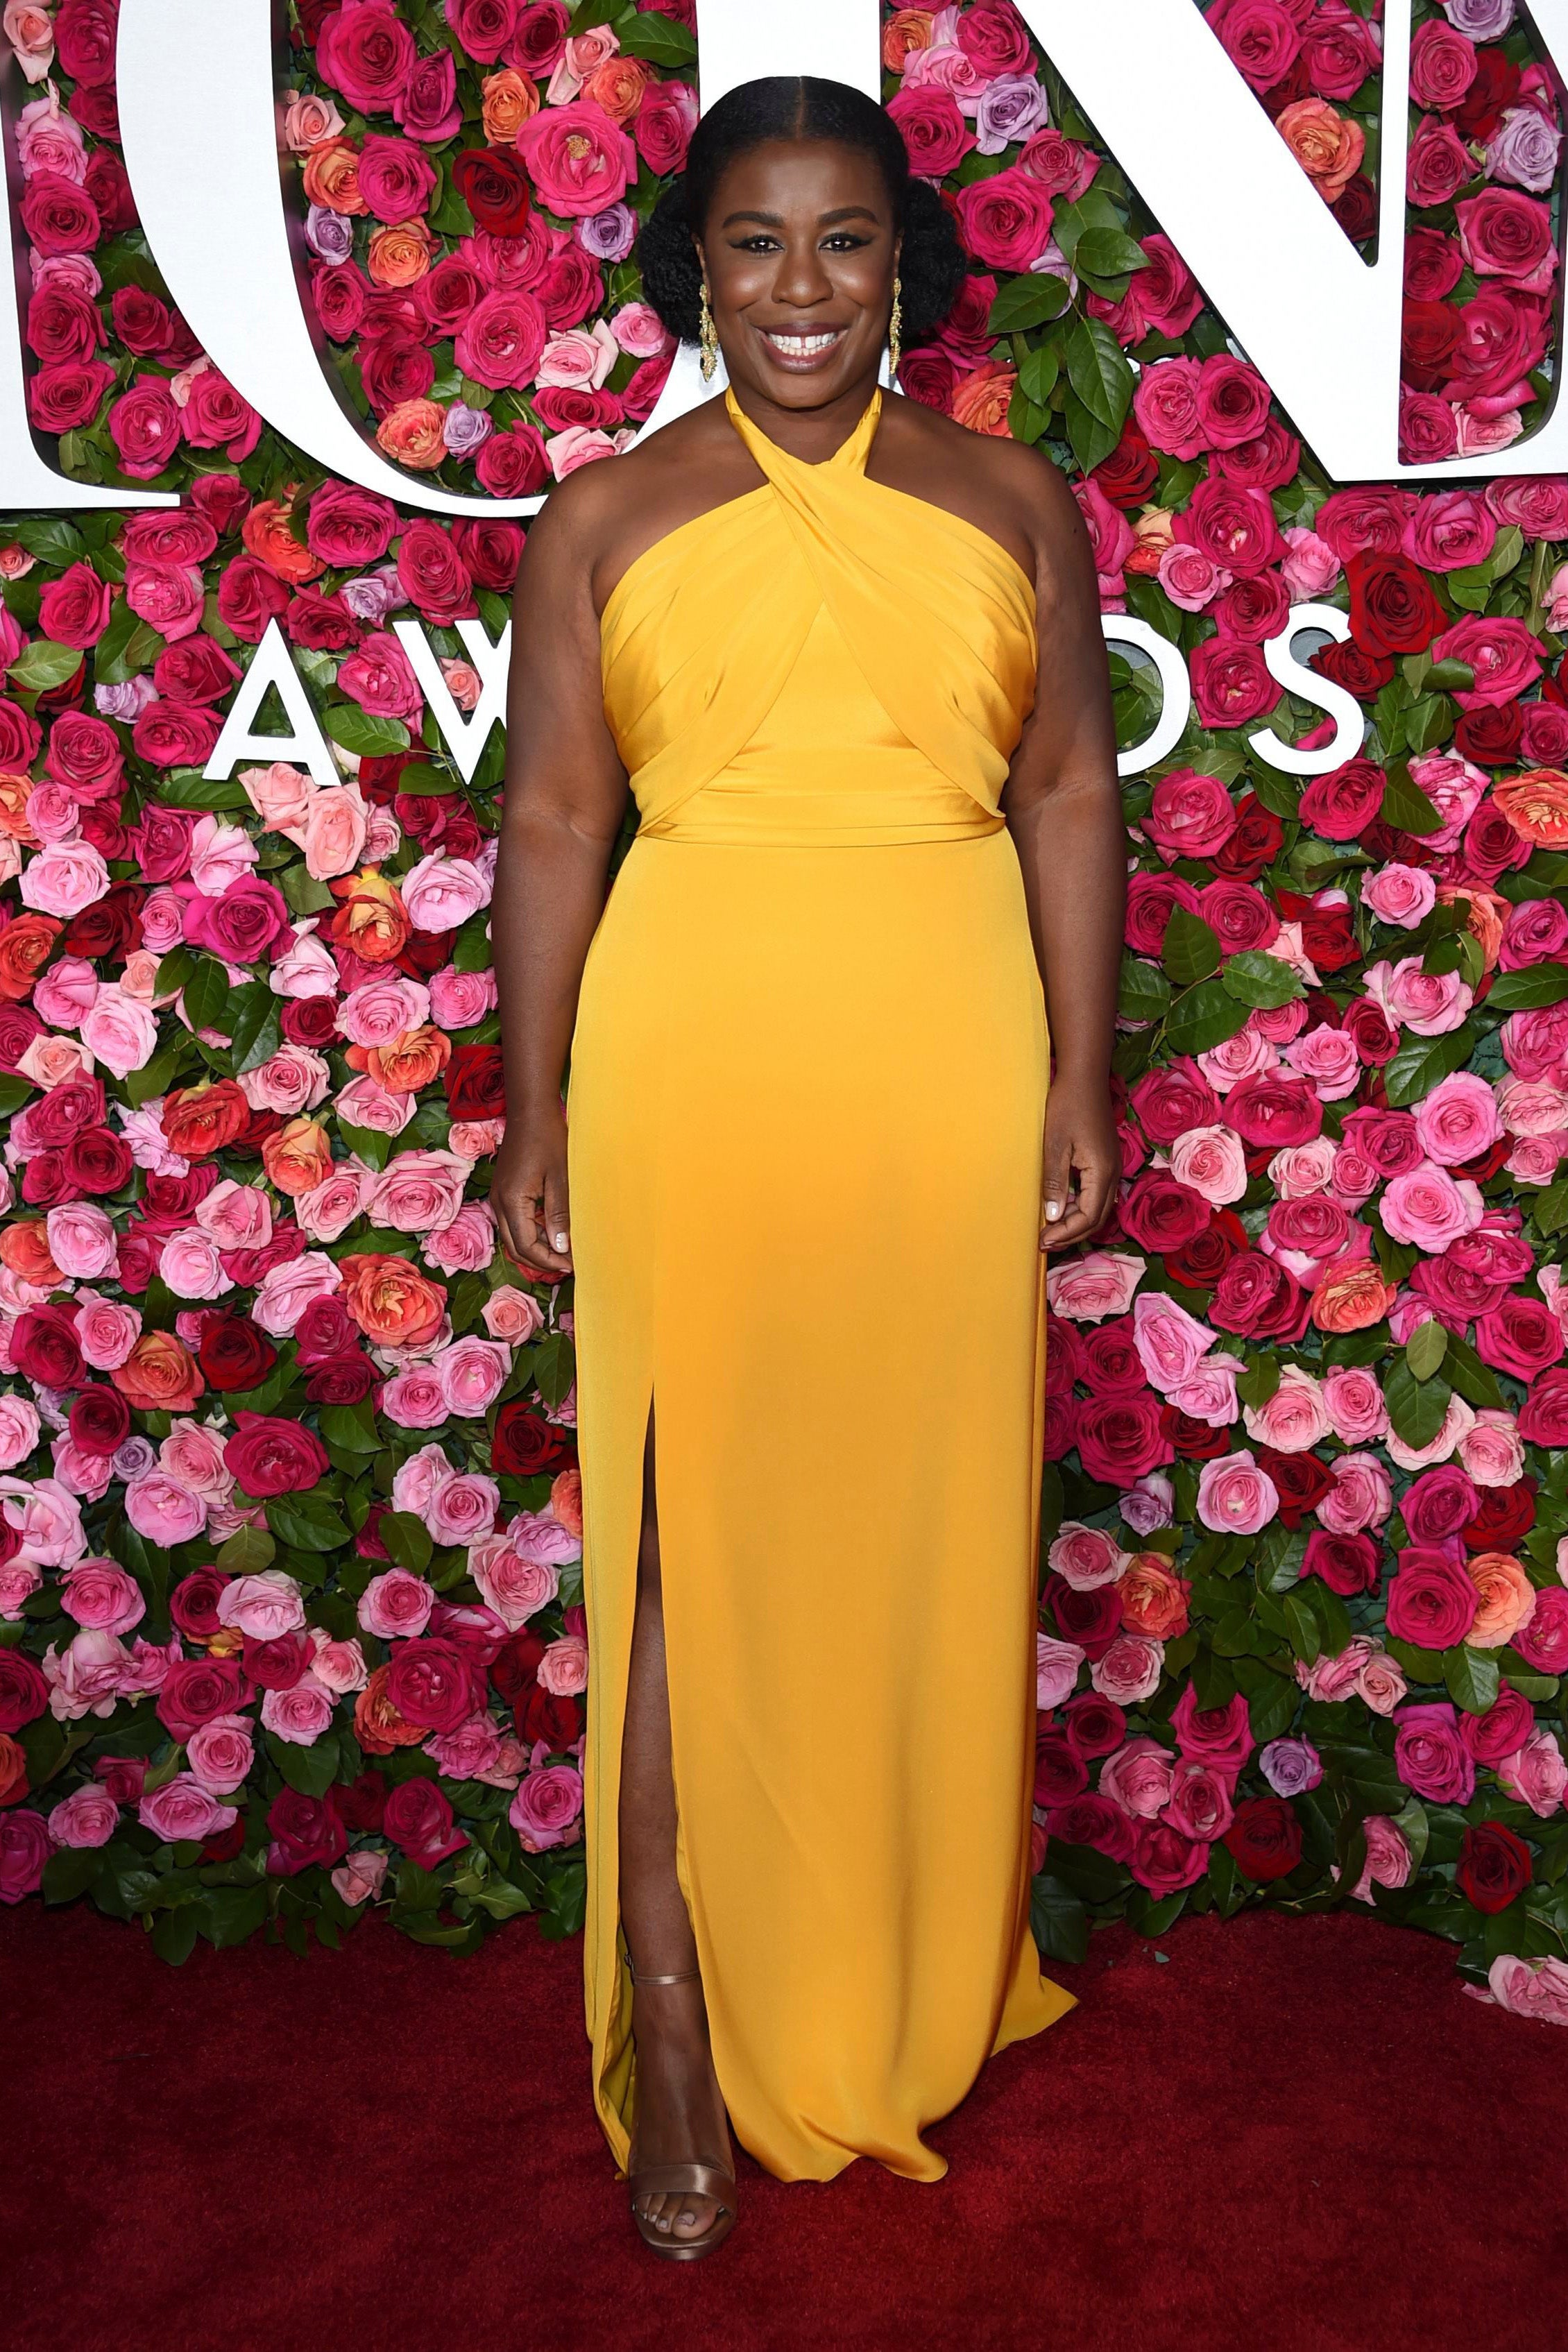 The 2018 Tony Awards Red Carpet Was Dazzling Per Usual, Just Look
